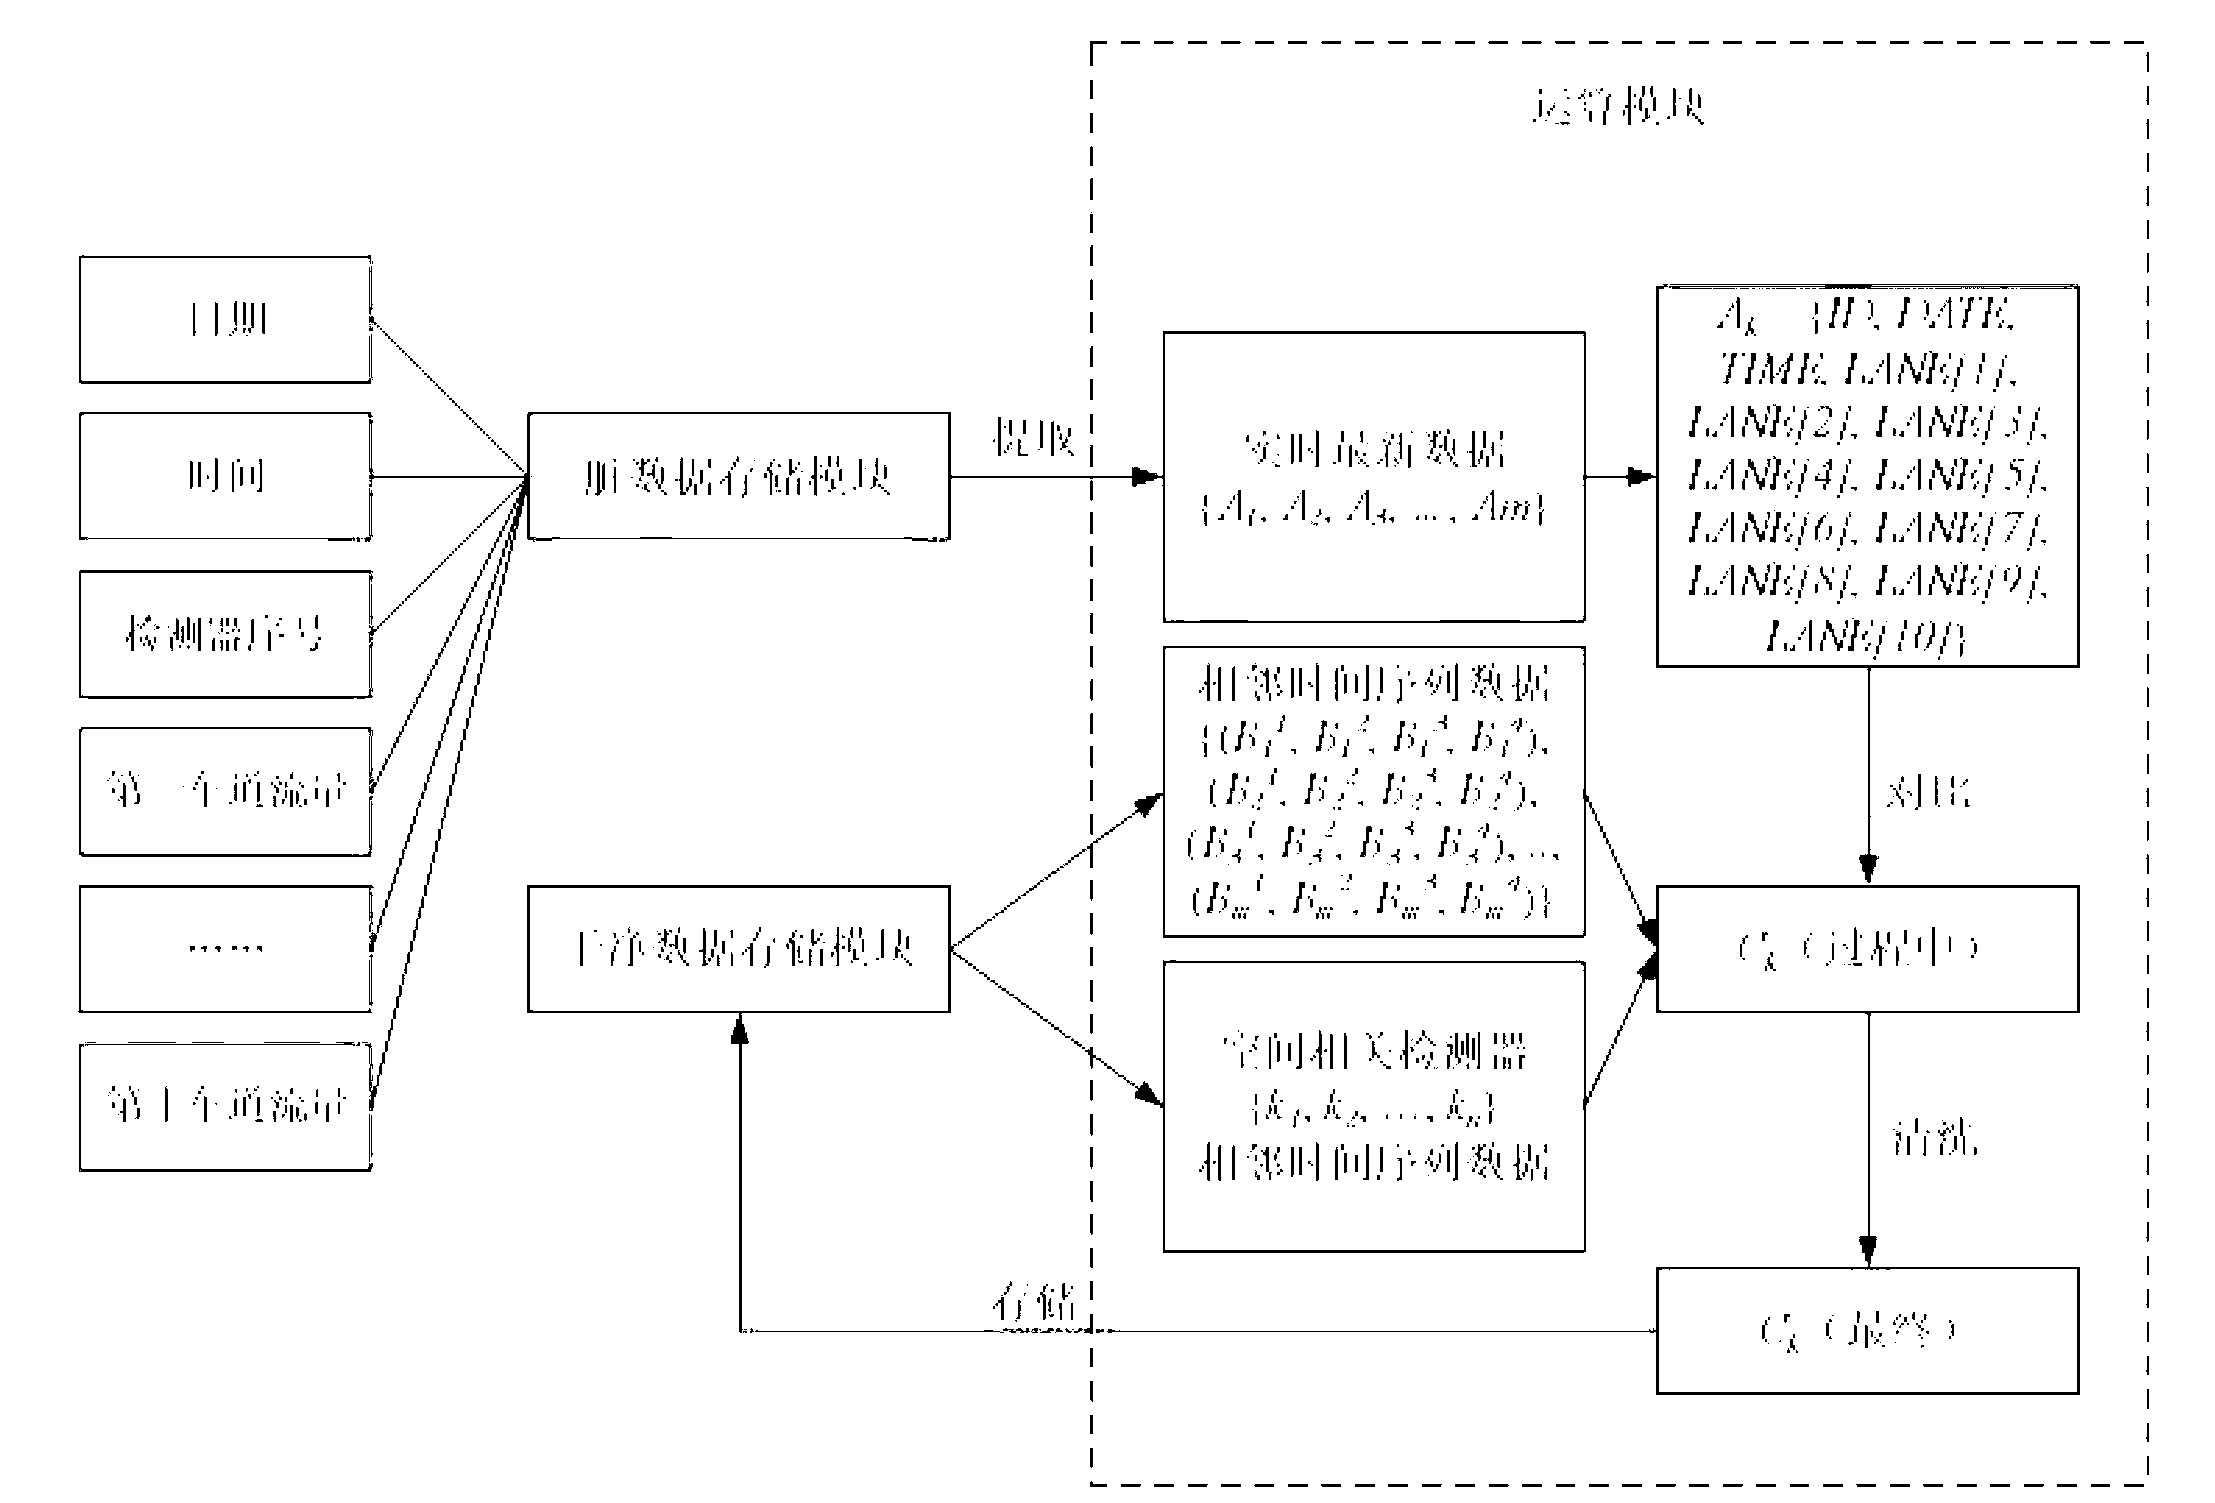 Method for cleaning traffic flow data on basis of time-space analysis